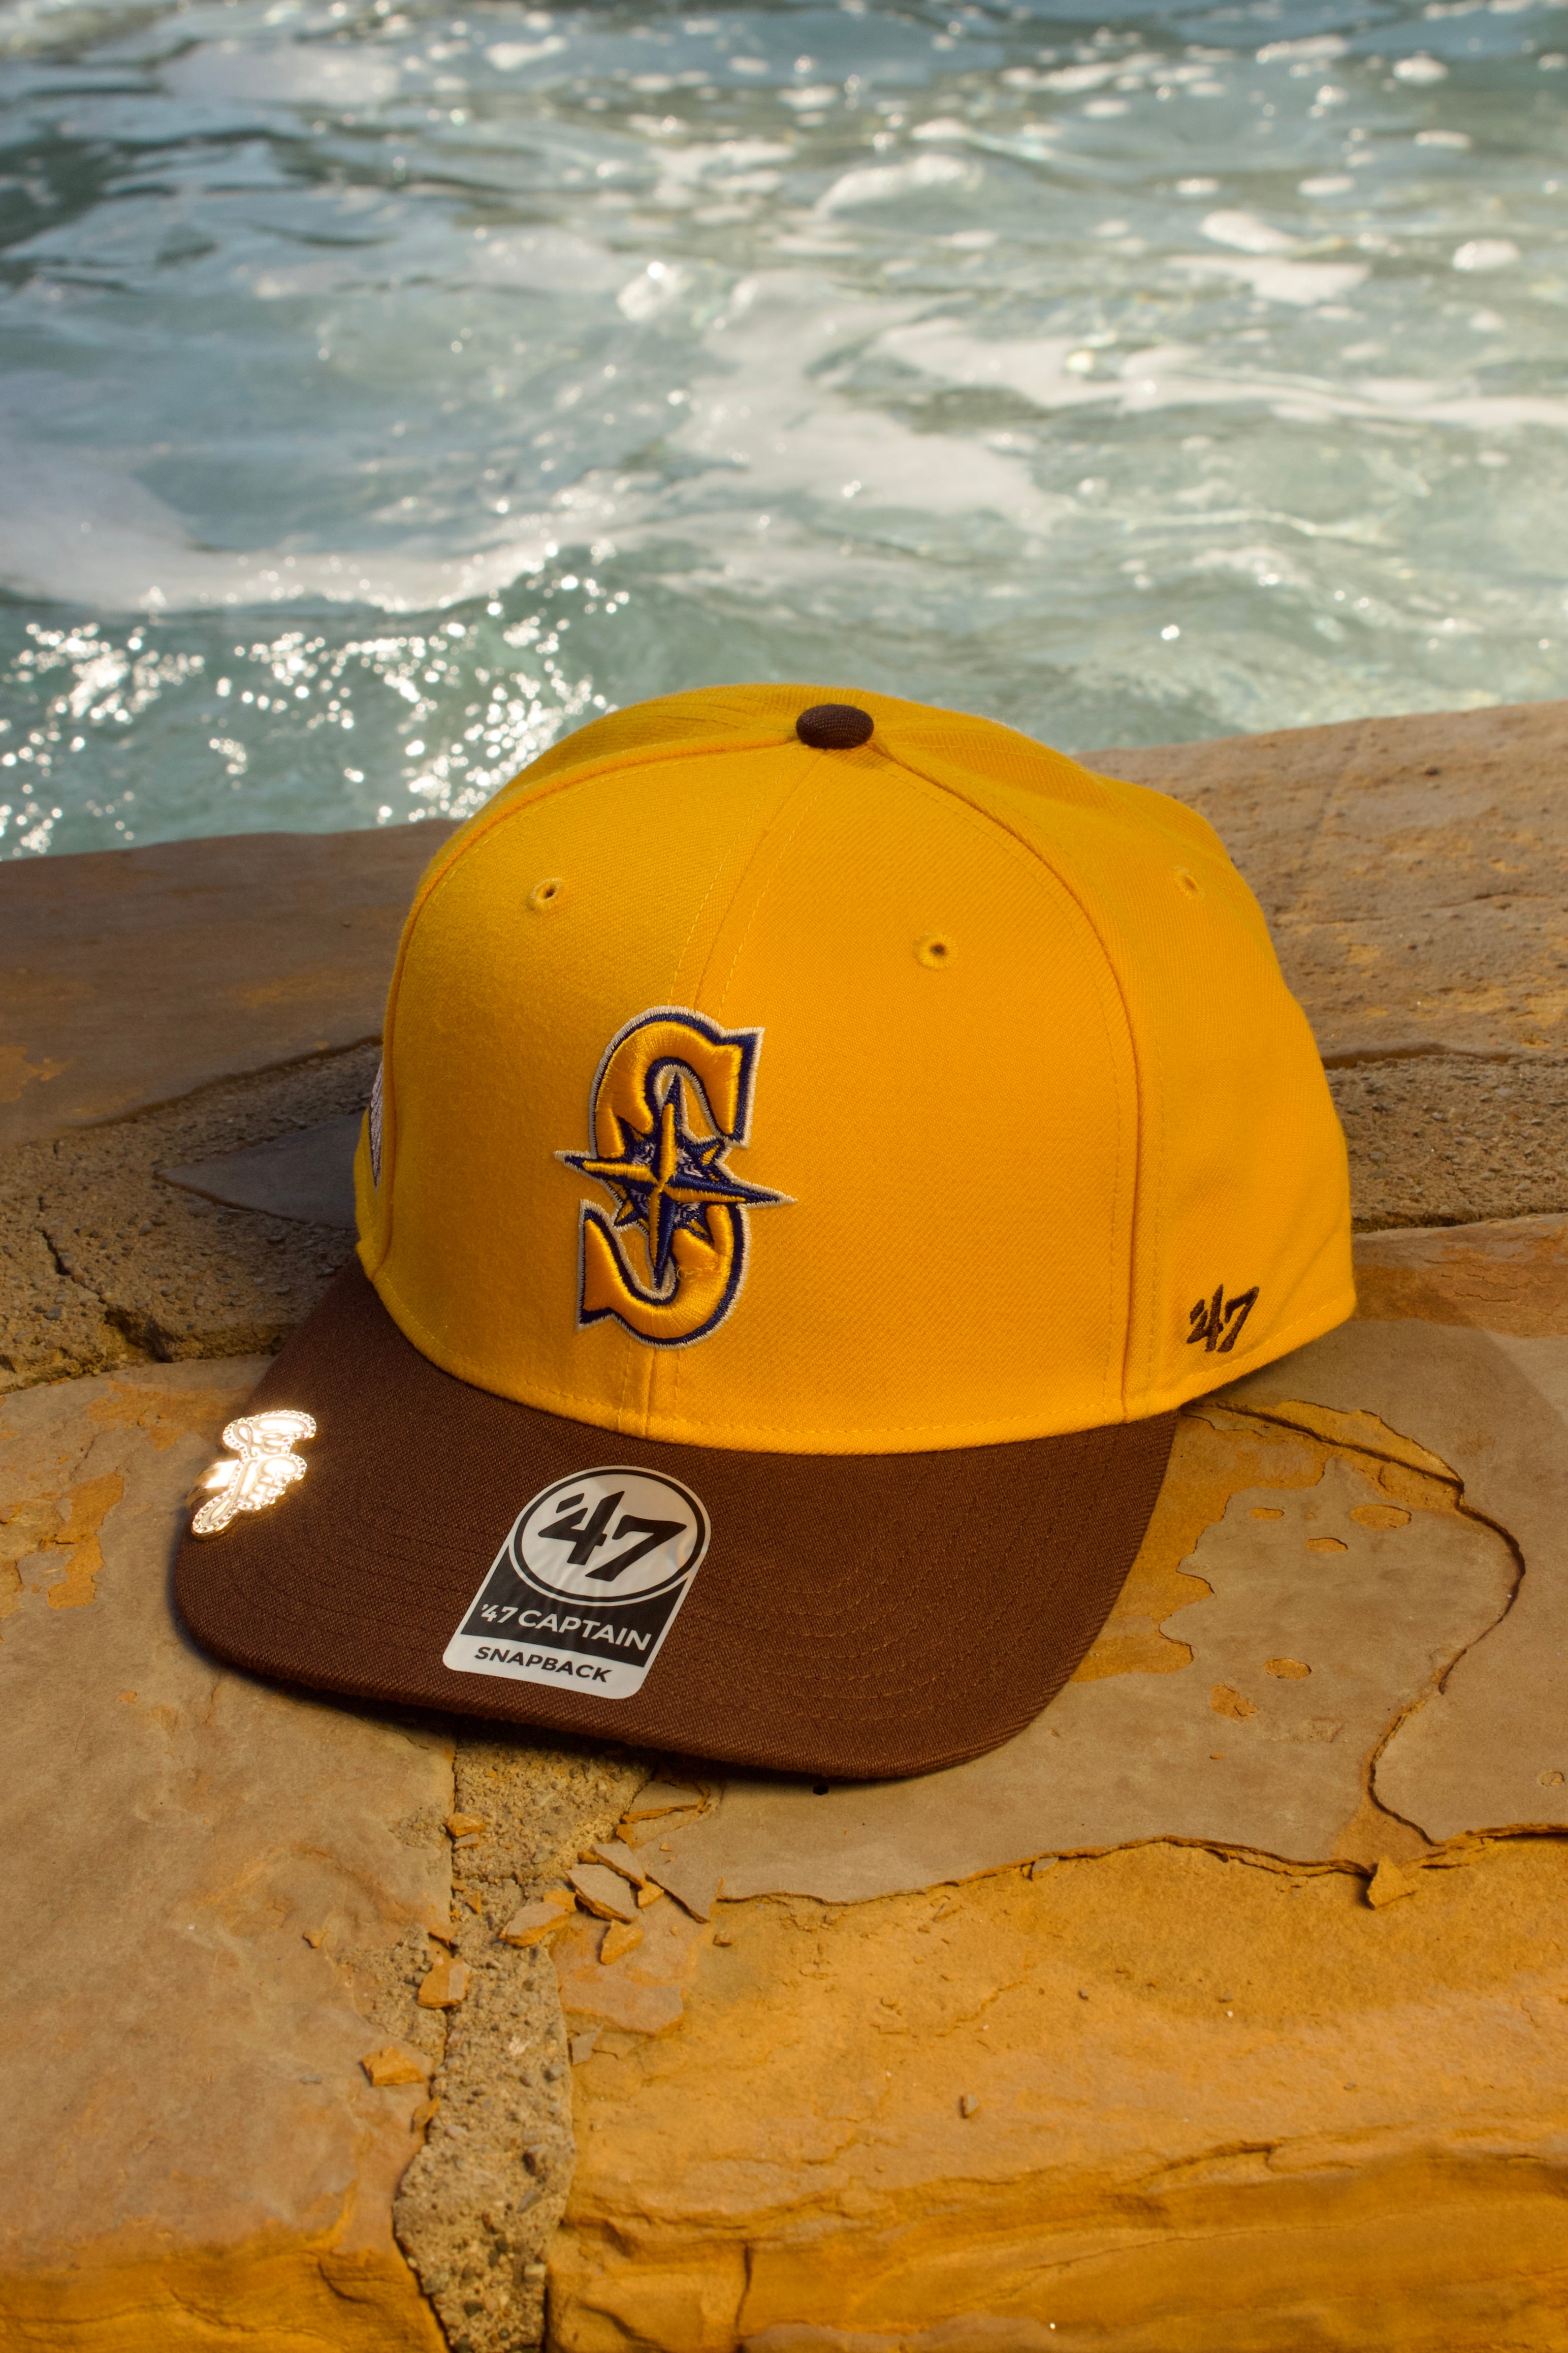 YELLOW GOLD/BROWN SEATTLE MARINERS '47 CAPTAIN SNAPBACK W/ 30TH ANNIVERSARY PATCH